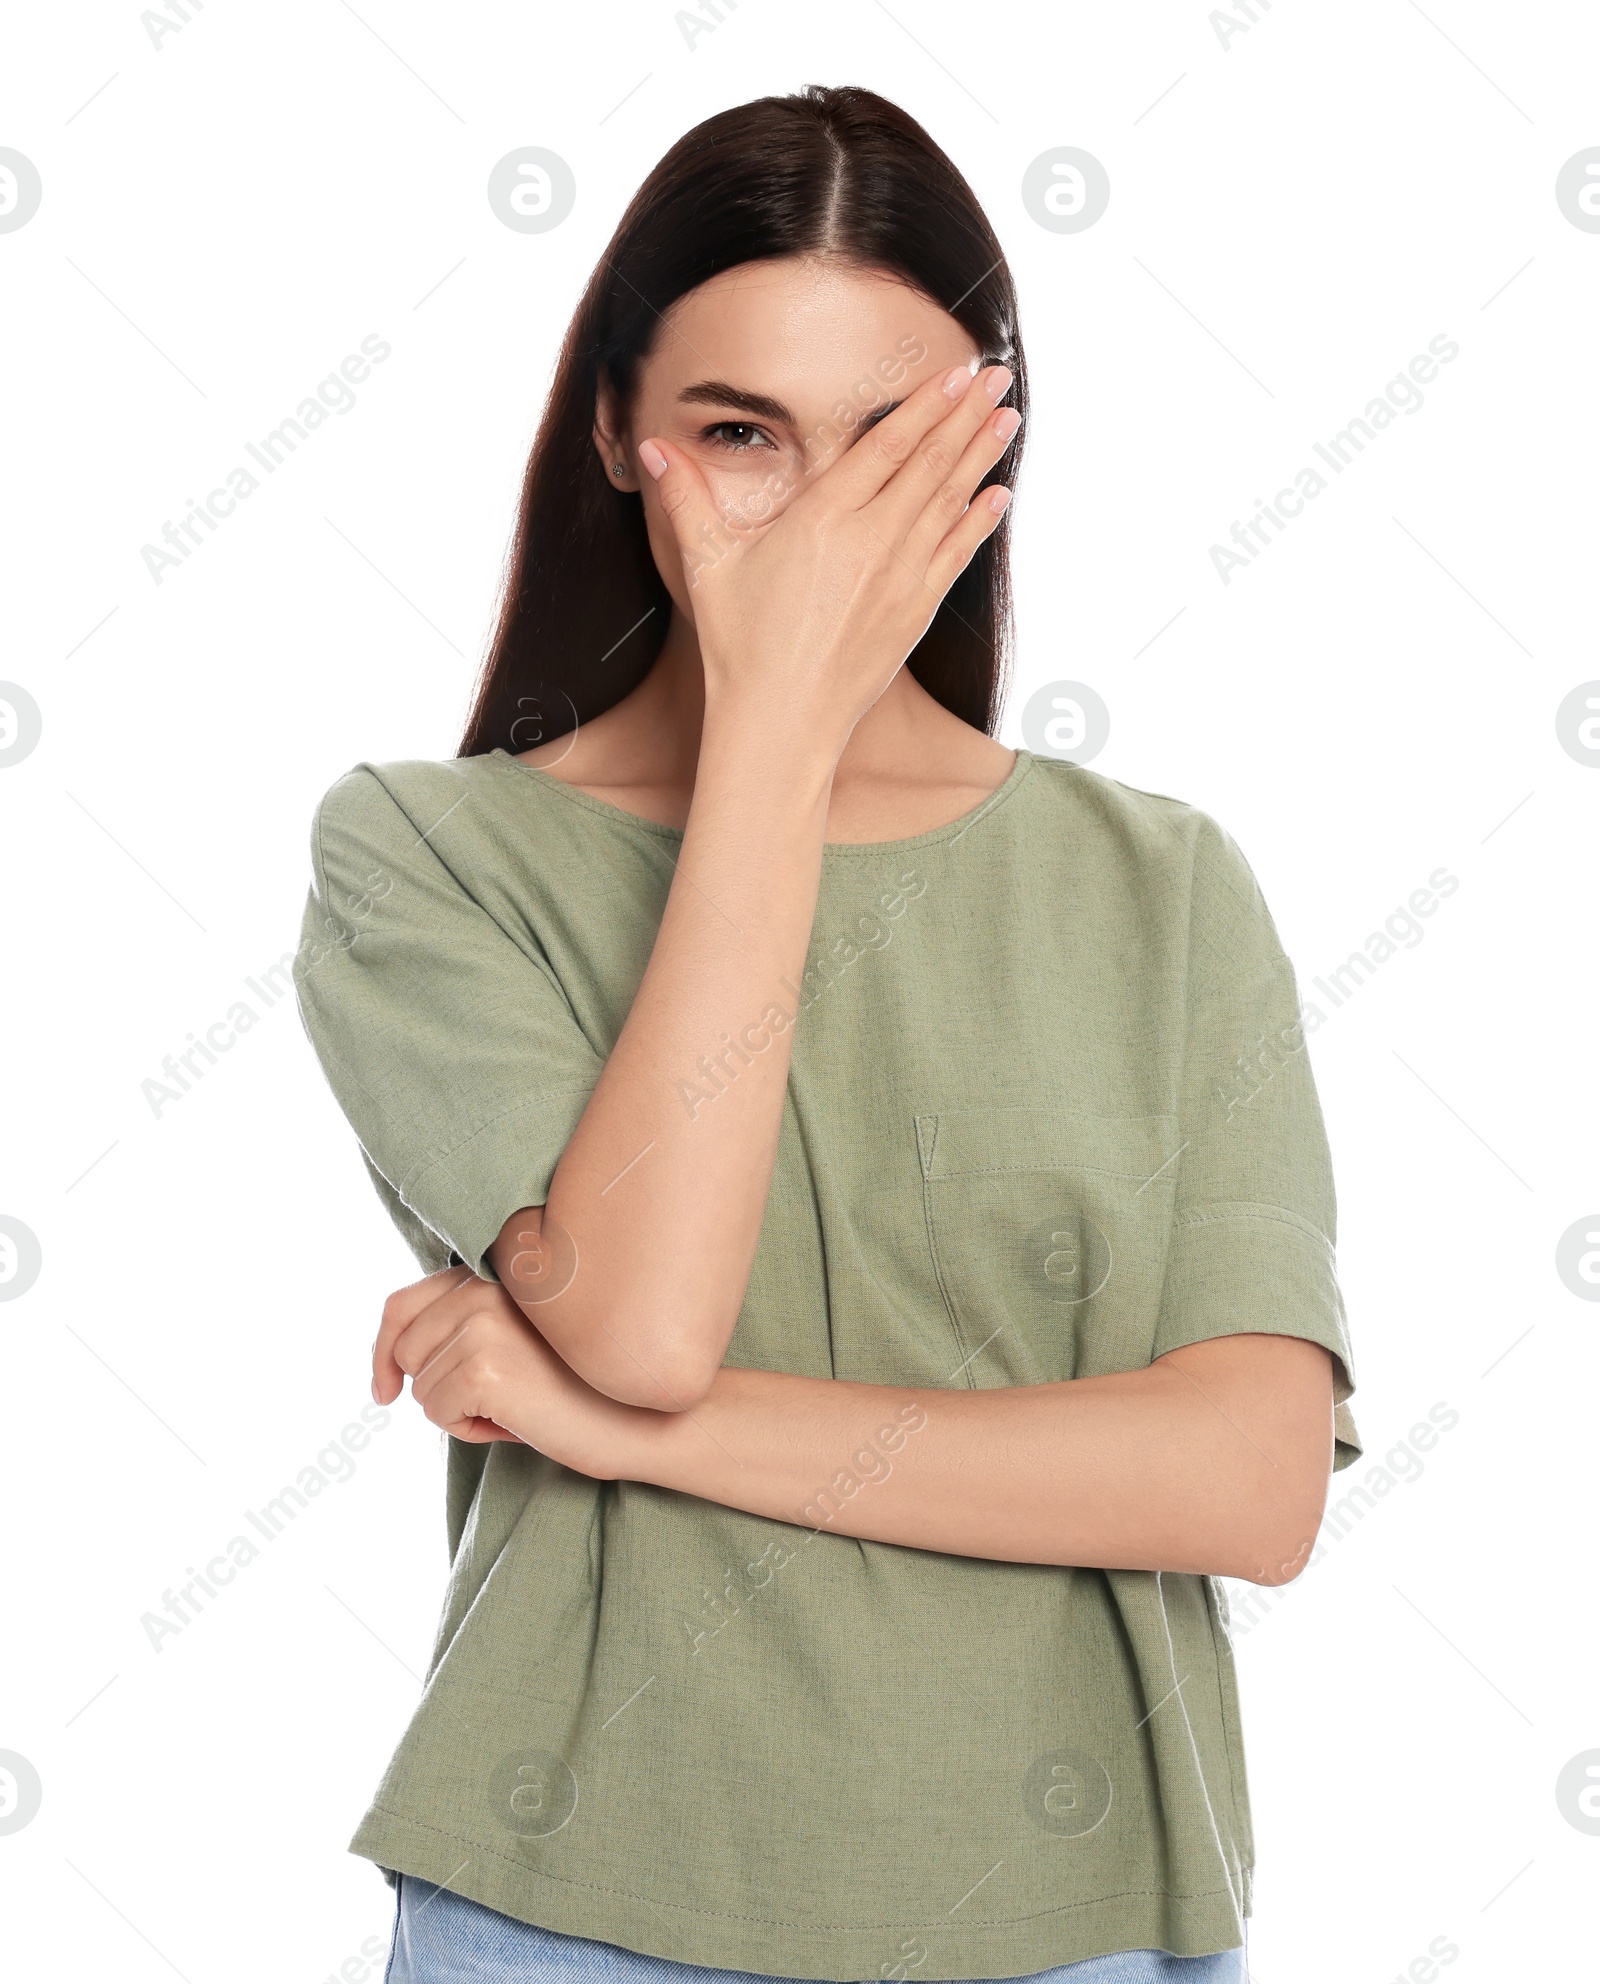 Photo of Embarrassed woman covering face with hand on white background